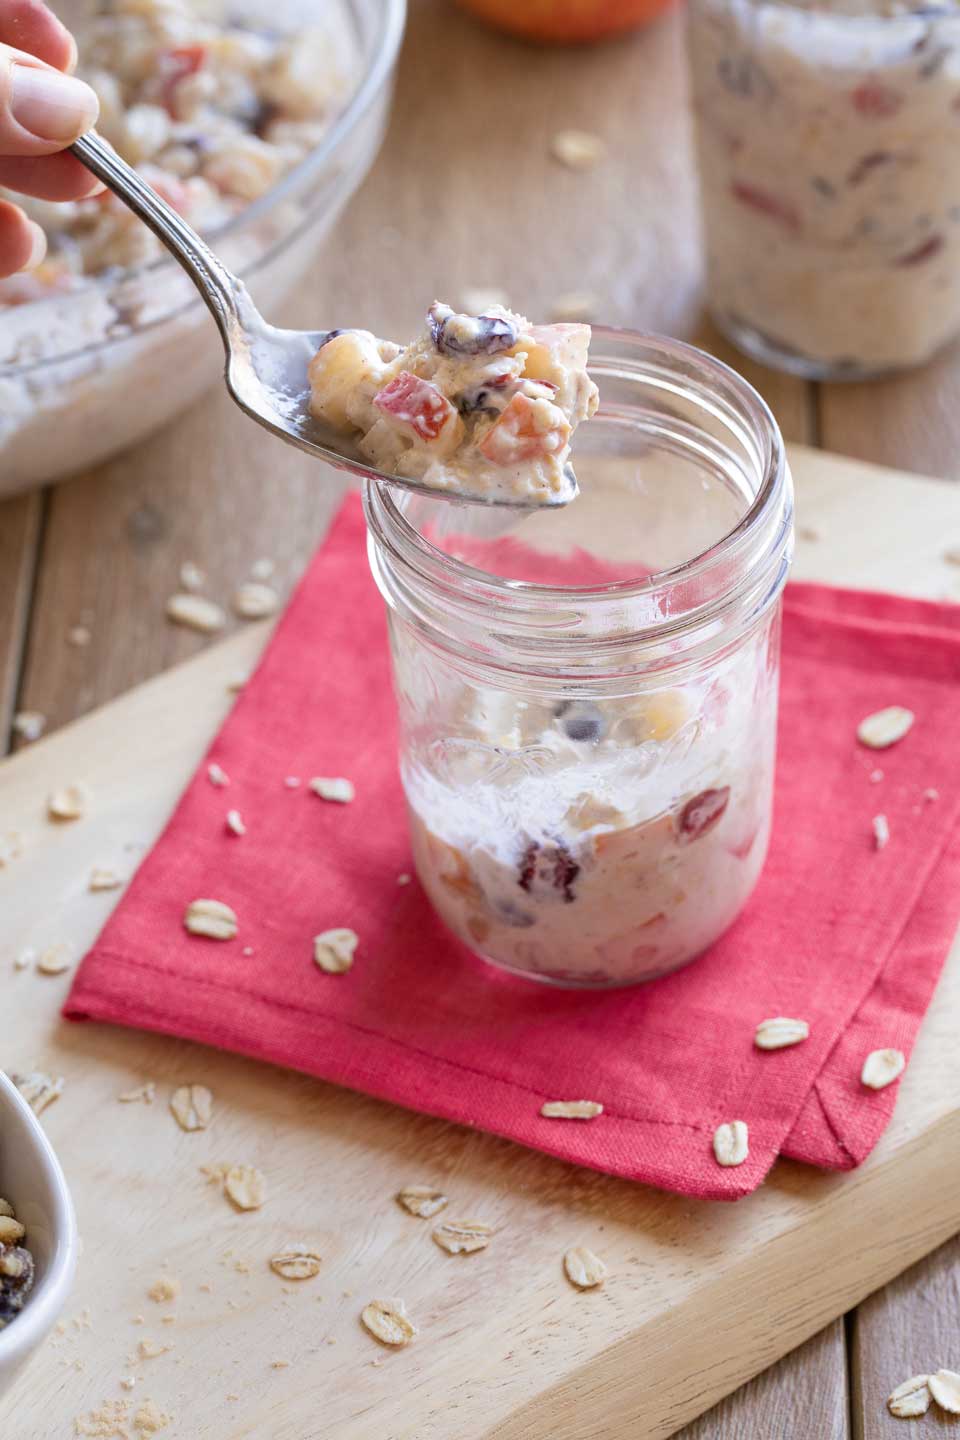 A hand holding a spoon and beginning to fill a meal prep jar with the Overnight Oats.